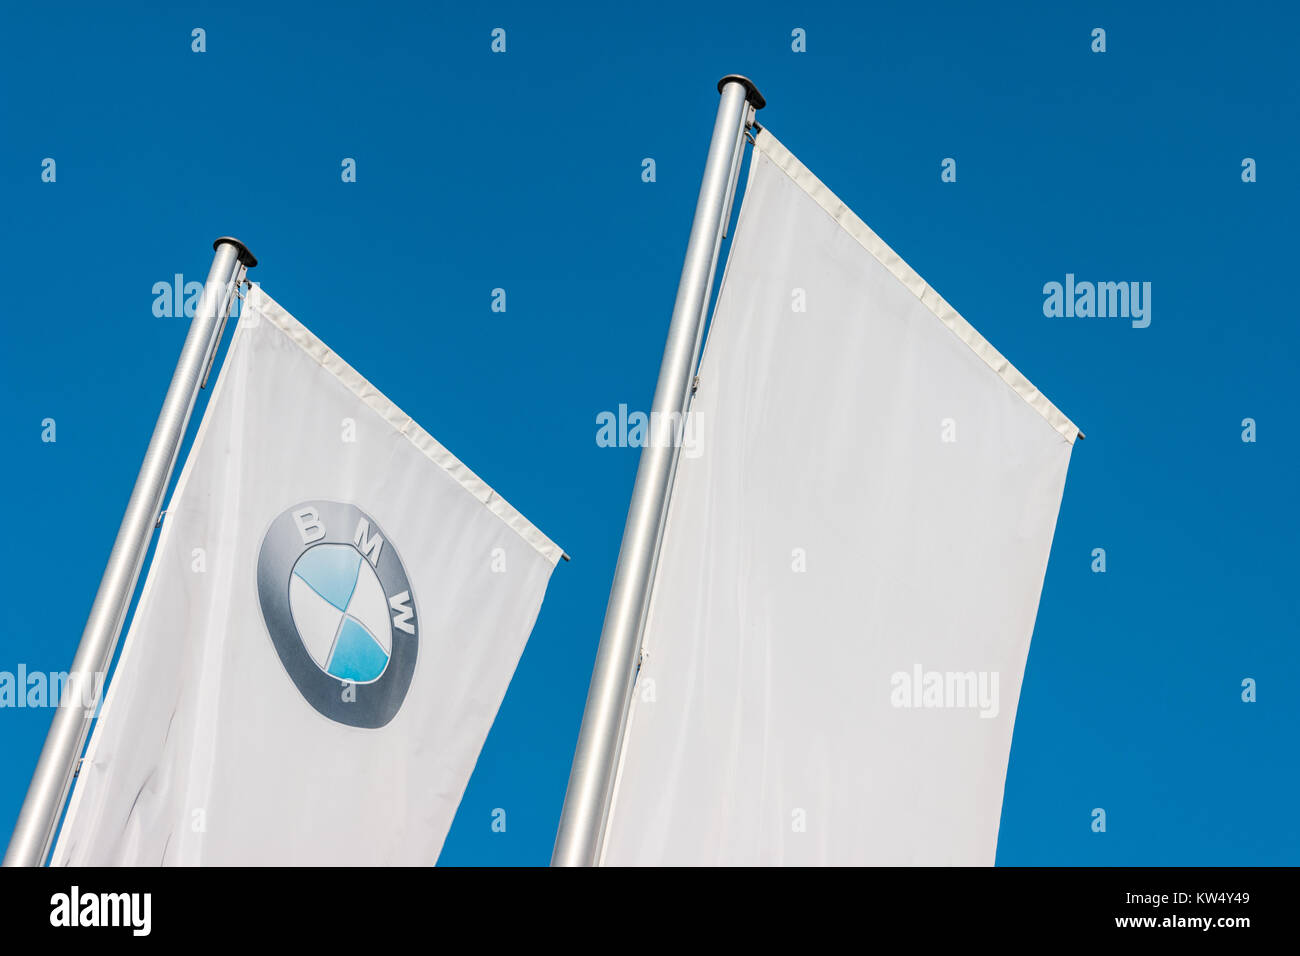 Sign of a BMW logo on white flags. BMW is a vehicle, motorcycle, and engine manufacturing company from Munich, Bavaria, Germany. Stock Photo